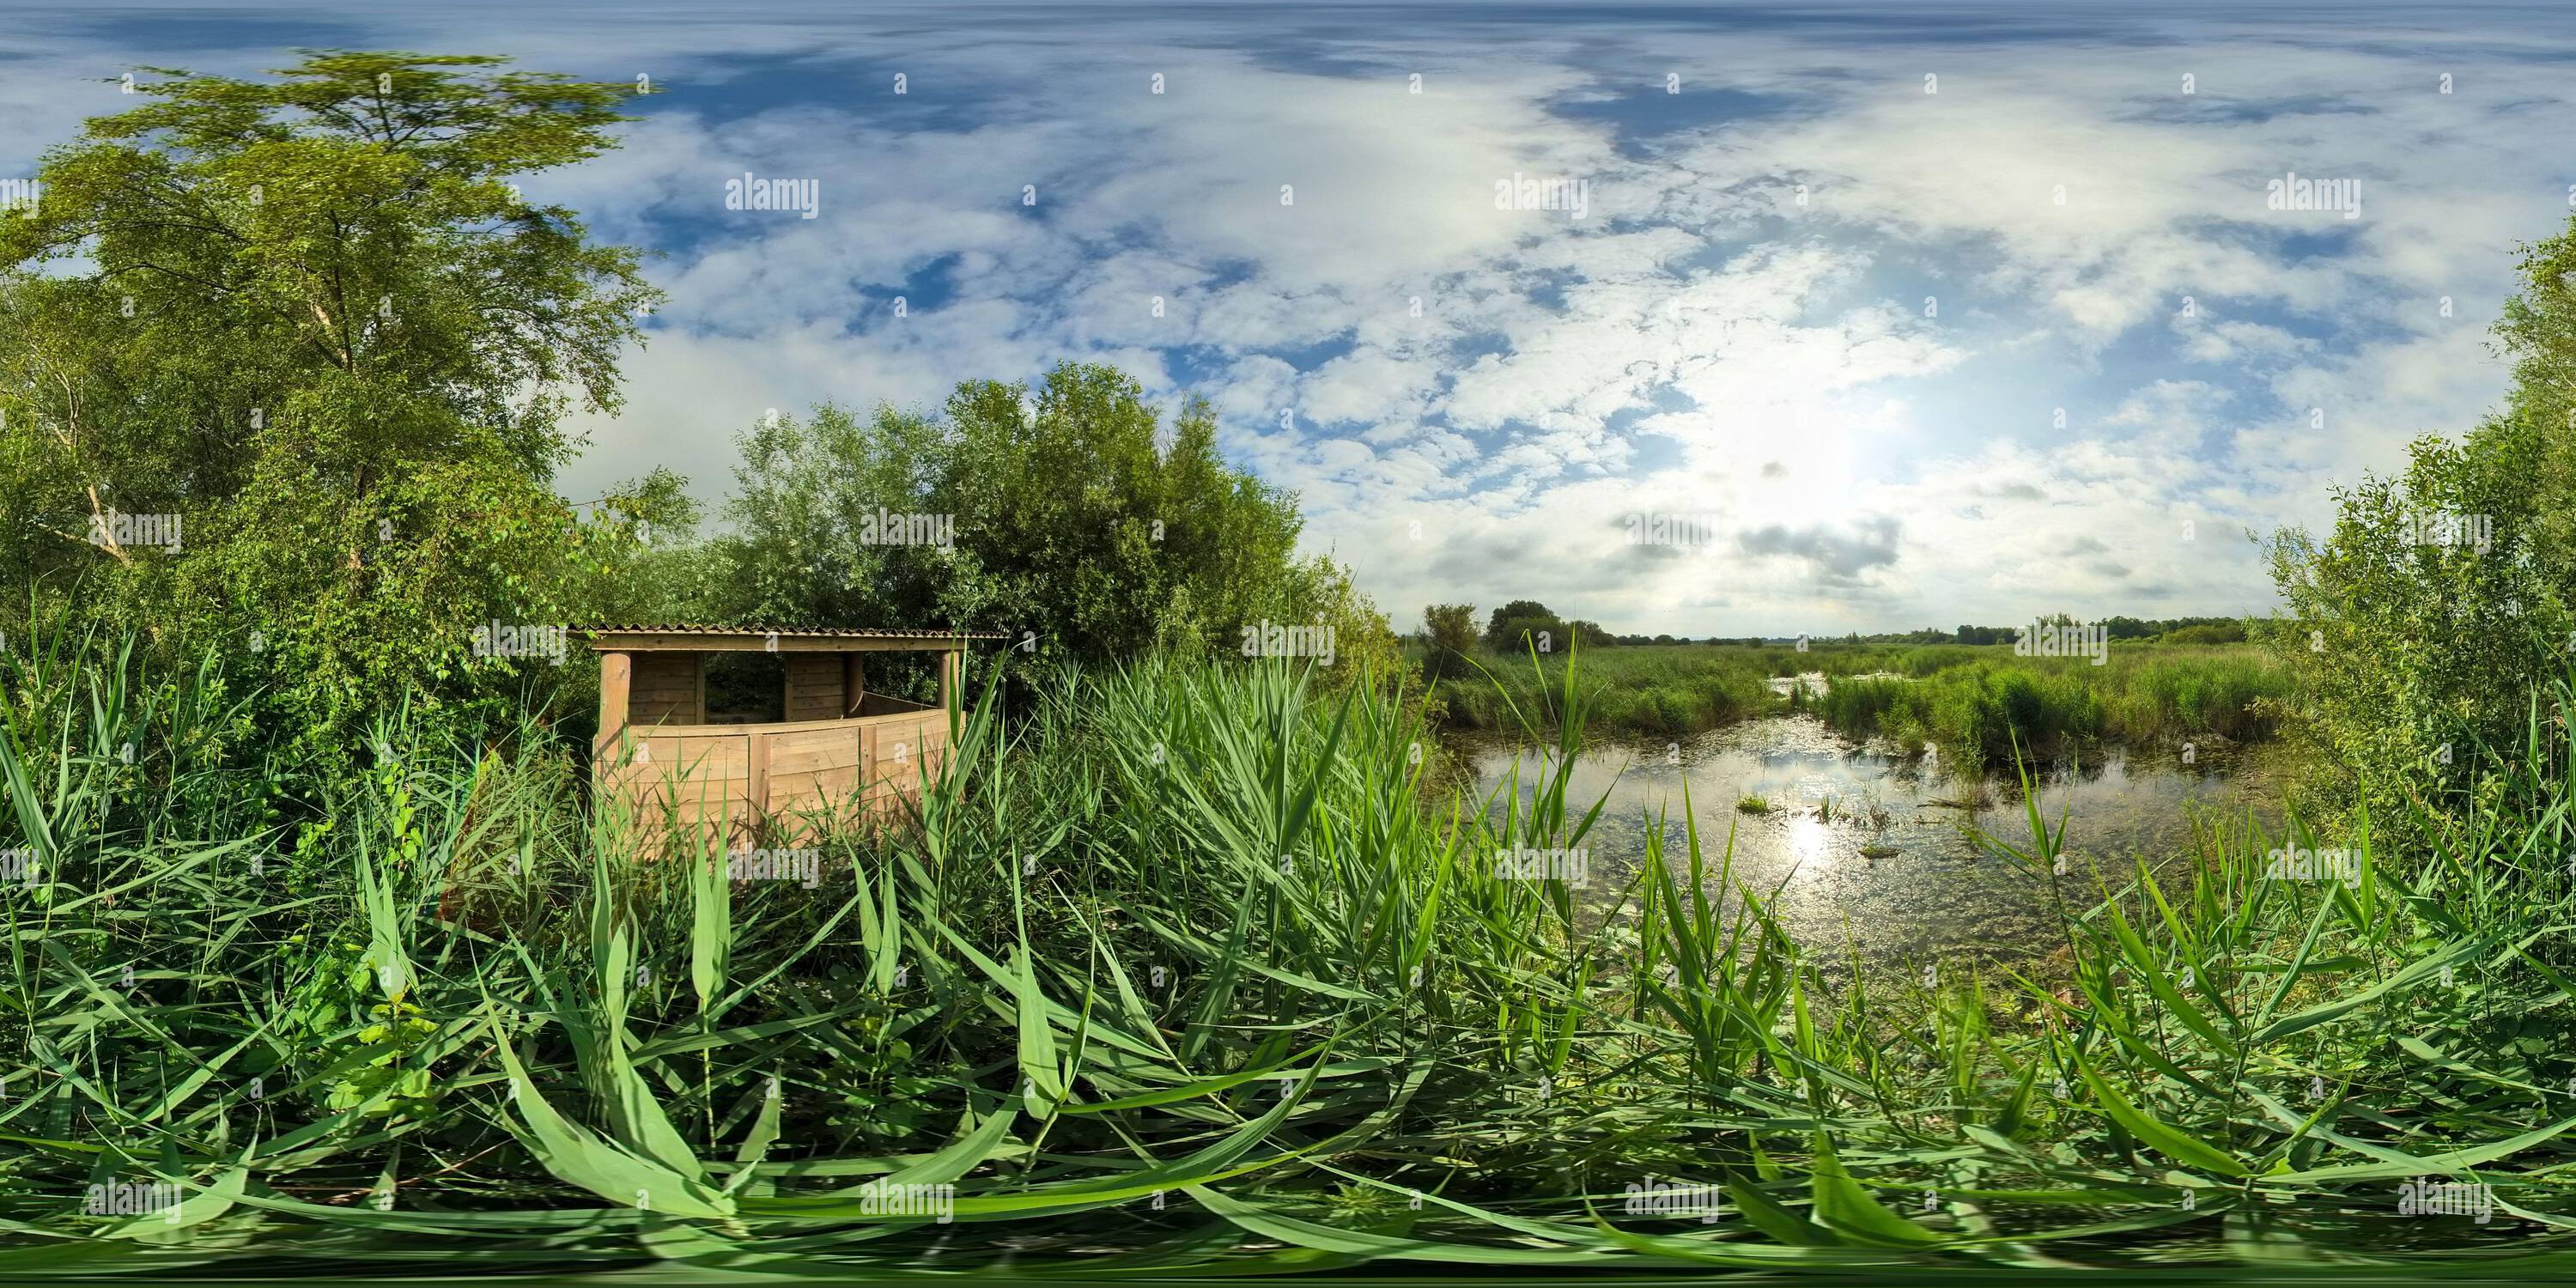 360 degree panoramic view of Above Reeds Outside 30 Acre Hide in Westhay Moor Natural Nature Reserve